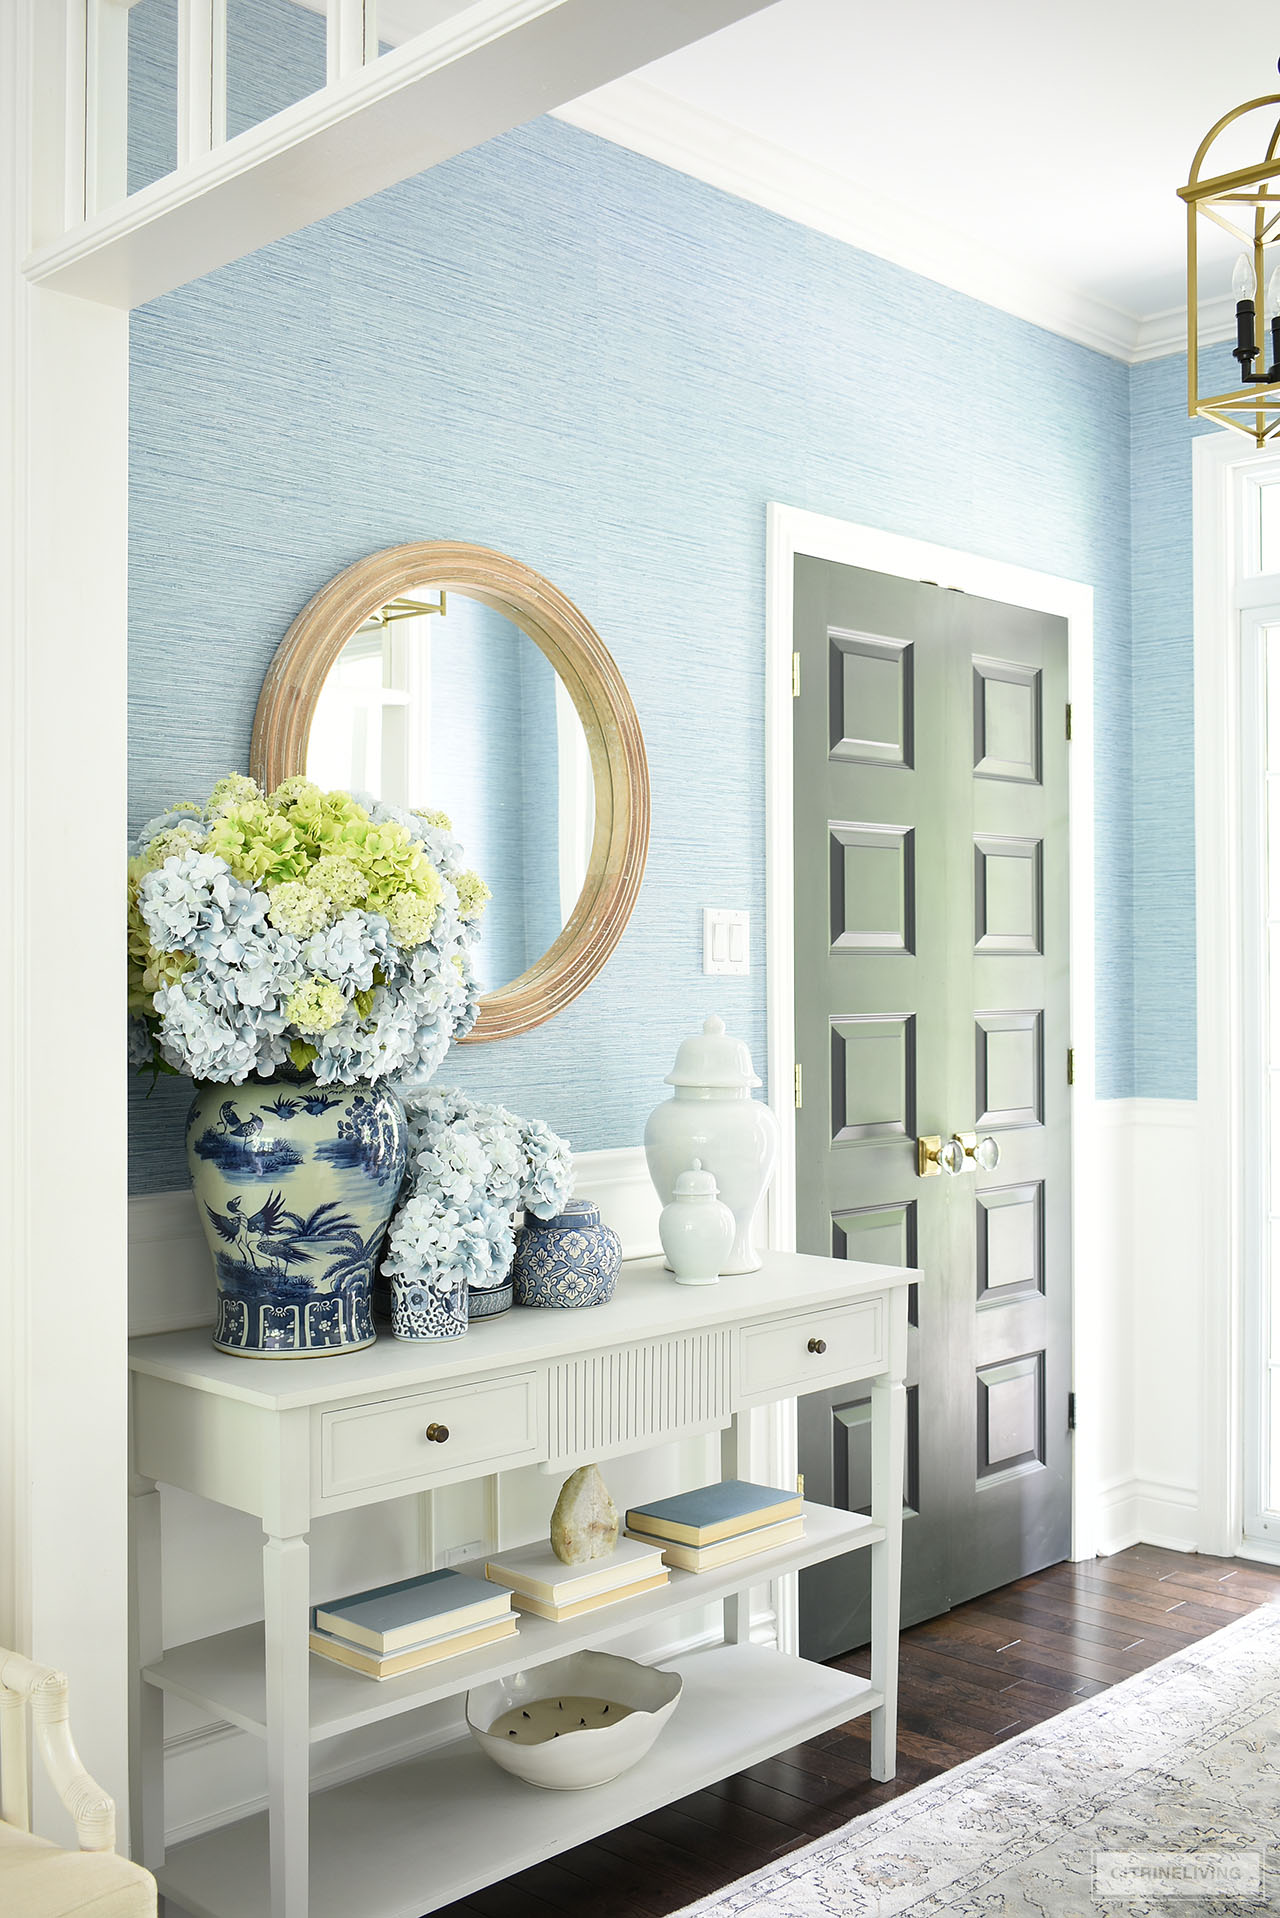 Entryway decorated in blue and white with a beautiful faux hydrangea arrangement in blue and green for summer.